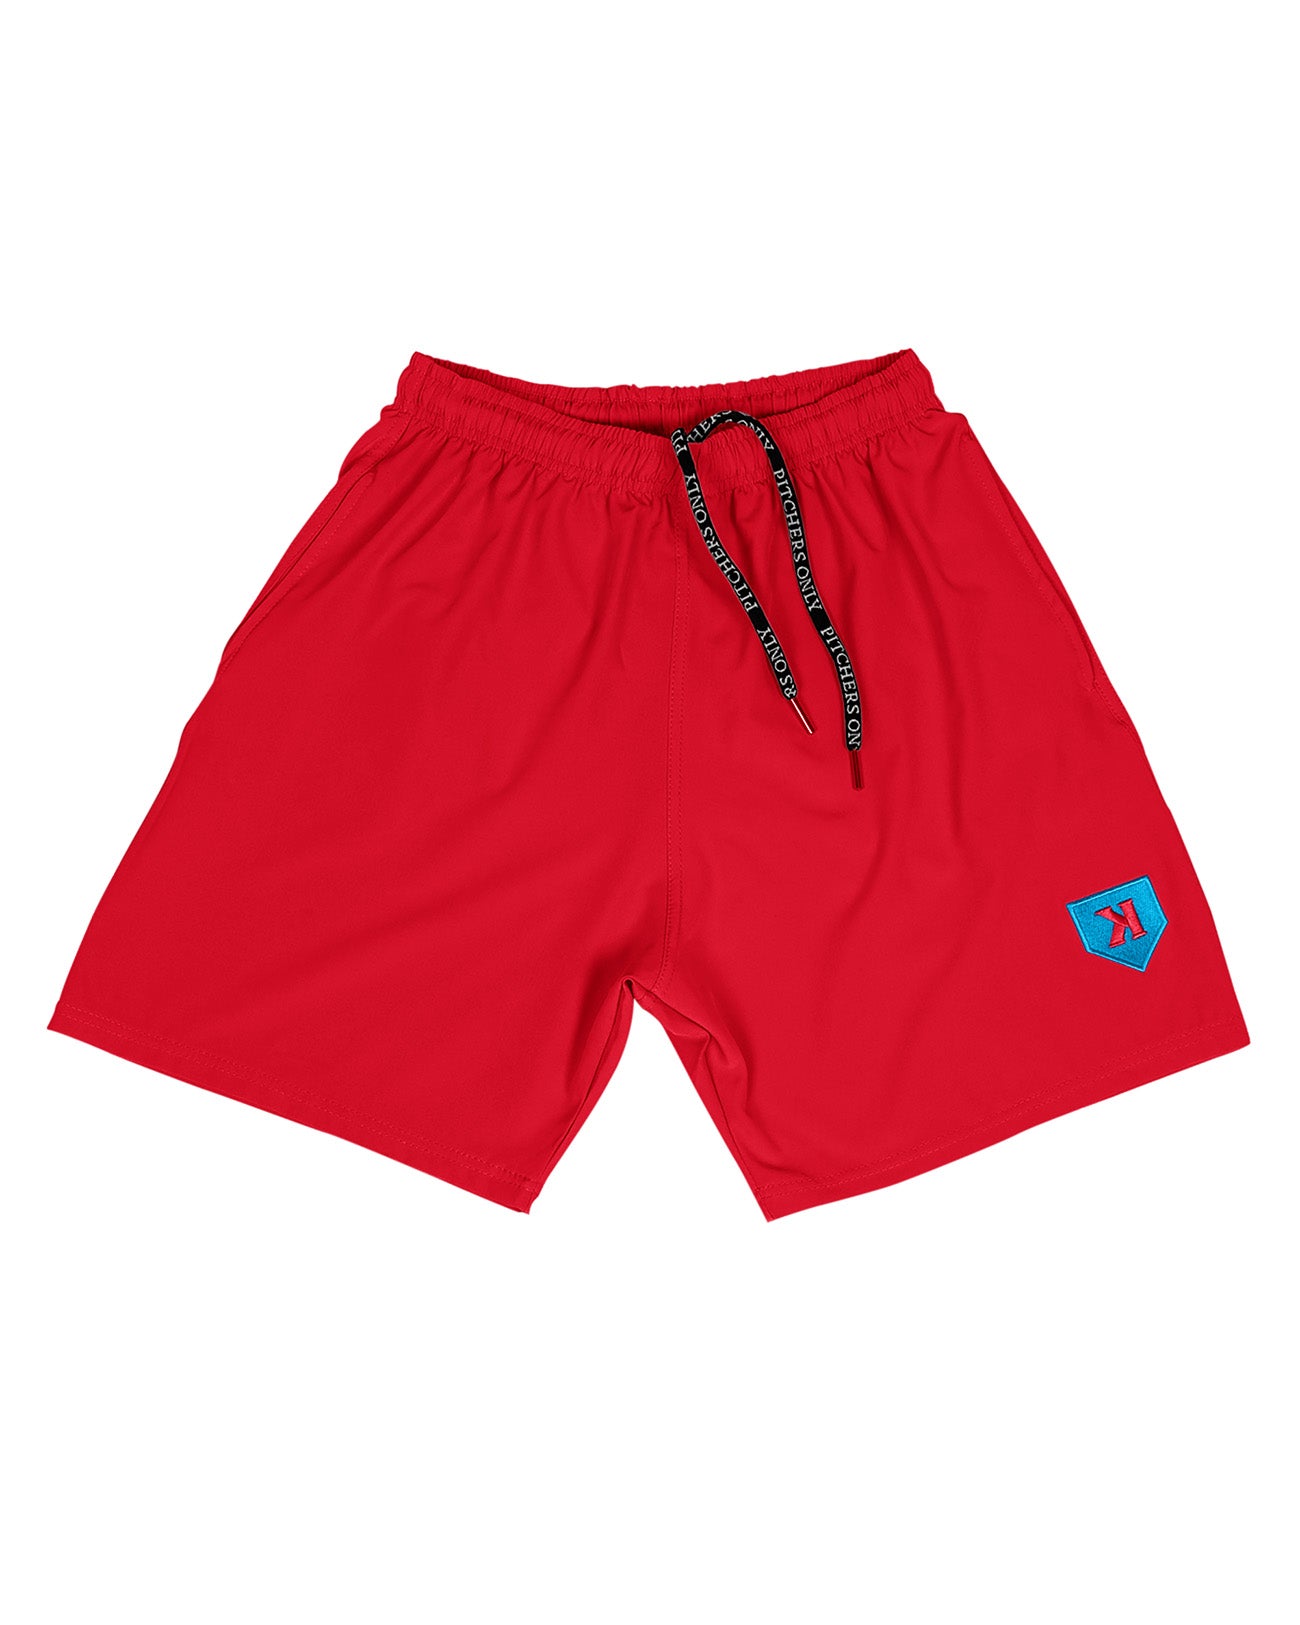 YOUTH Bold Red Training Shorts